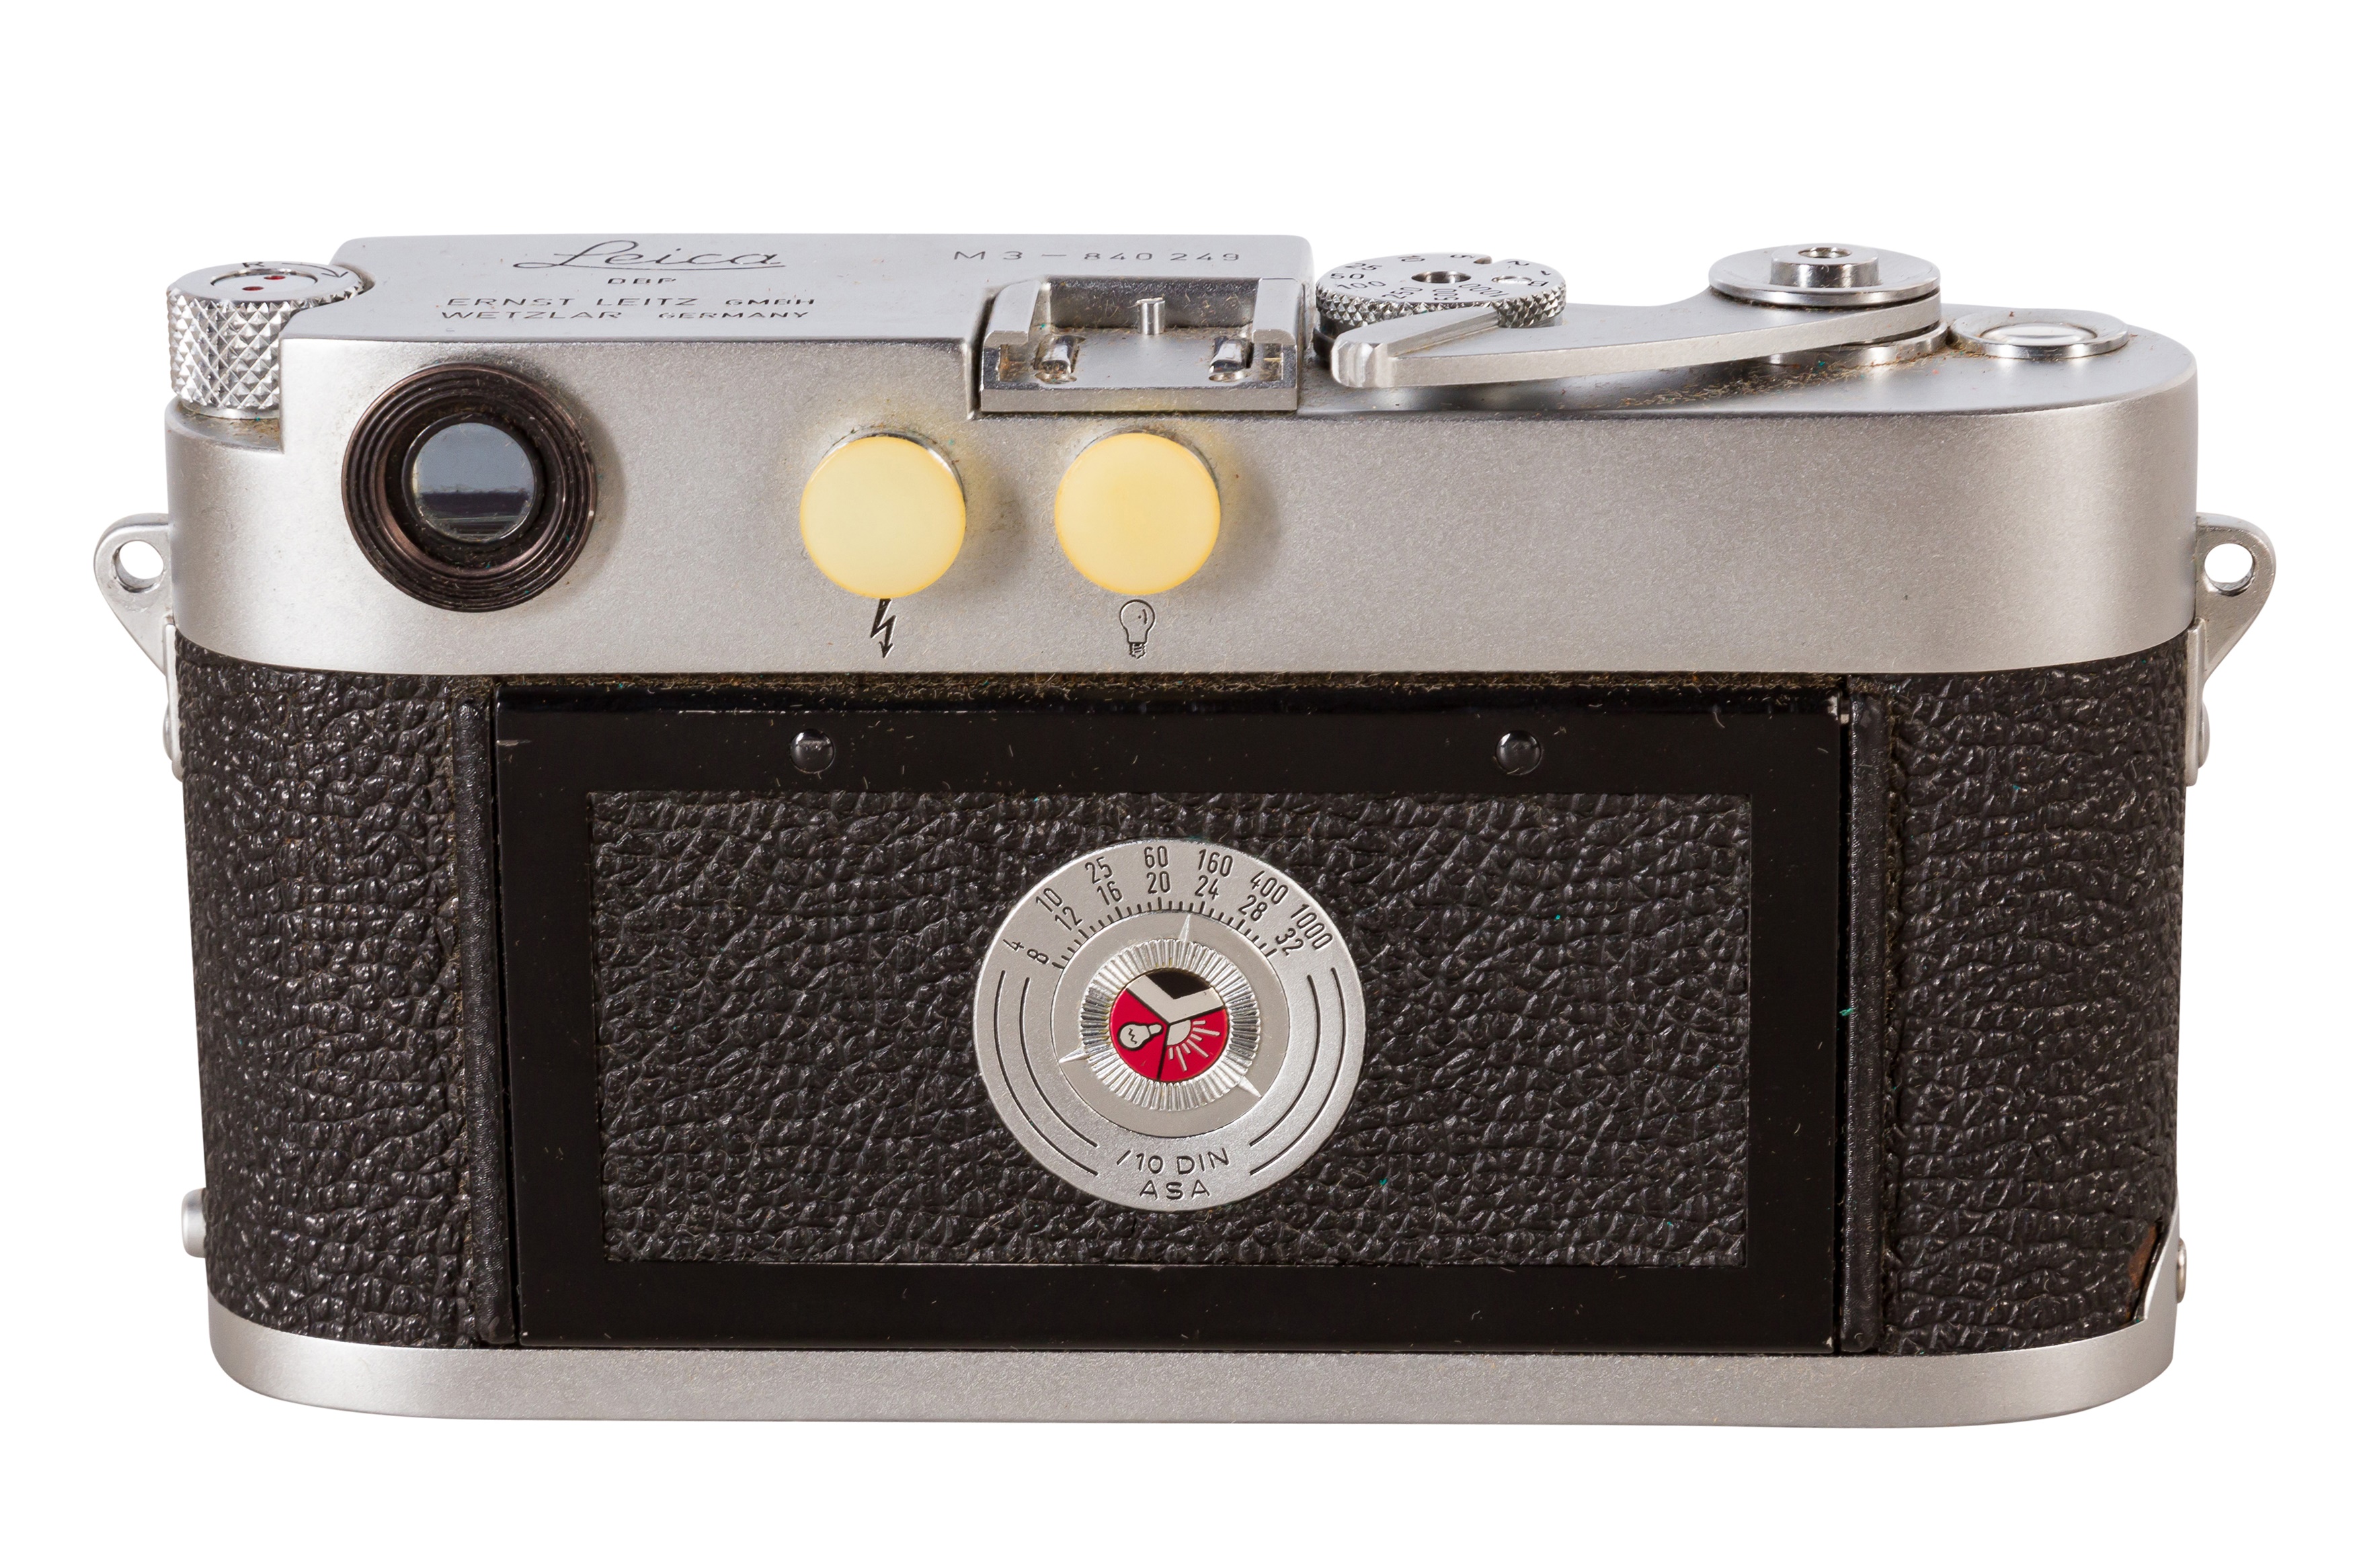 A Leica M3 DS Rangefinder Camera  - Image 4 of 5